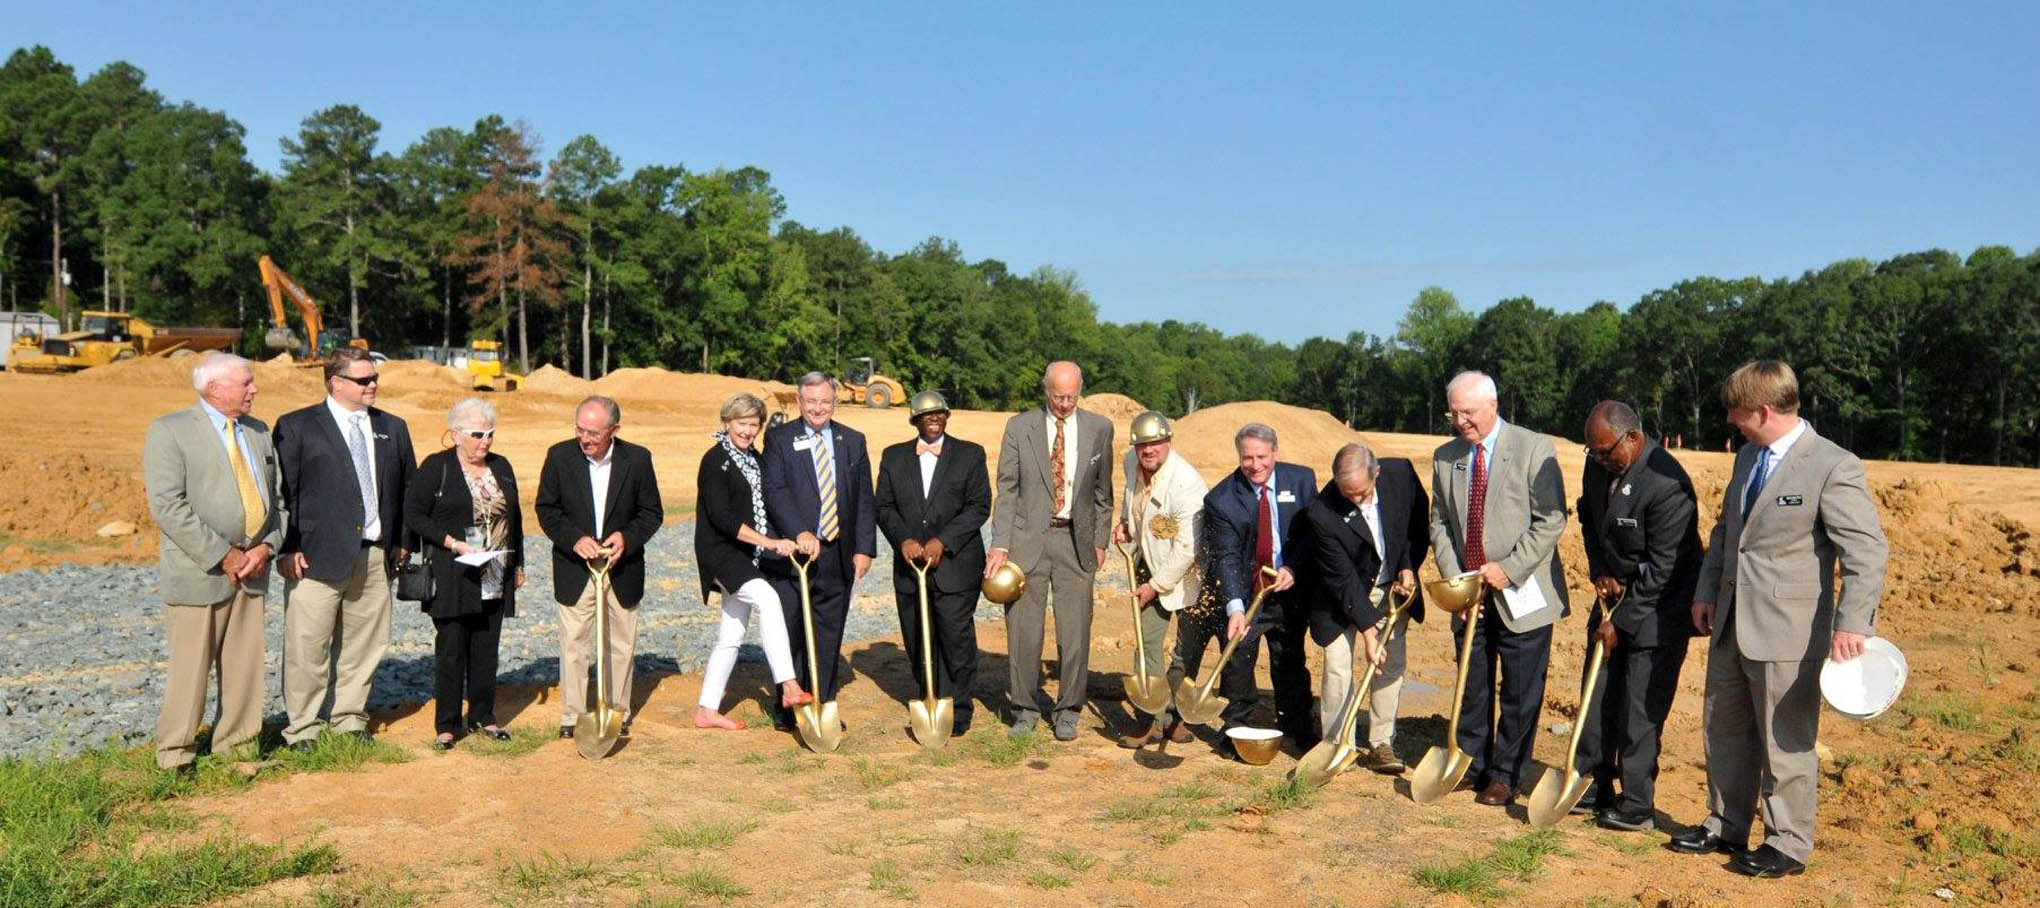 CCCC holds groundbreaking event in Chatham County